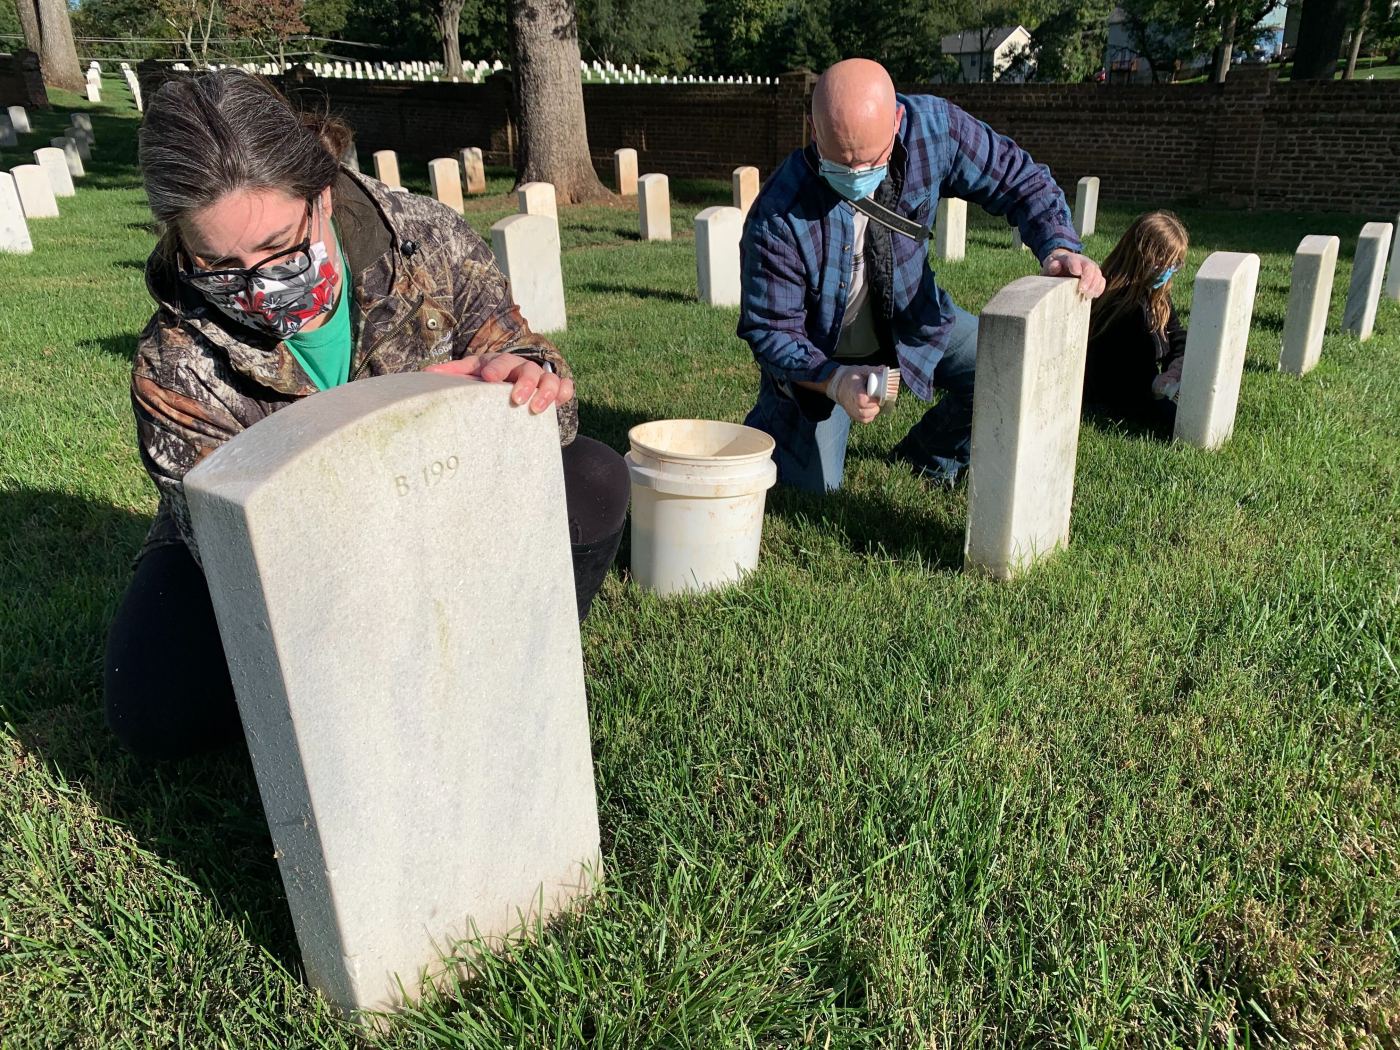 Volunteers return safely to national cemeteries during COVID-19